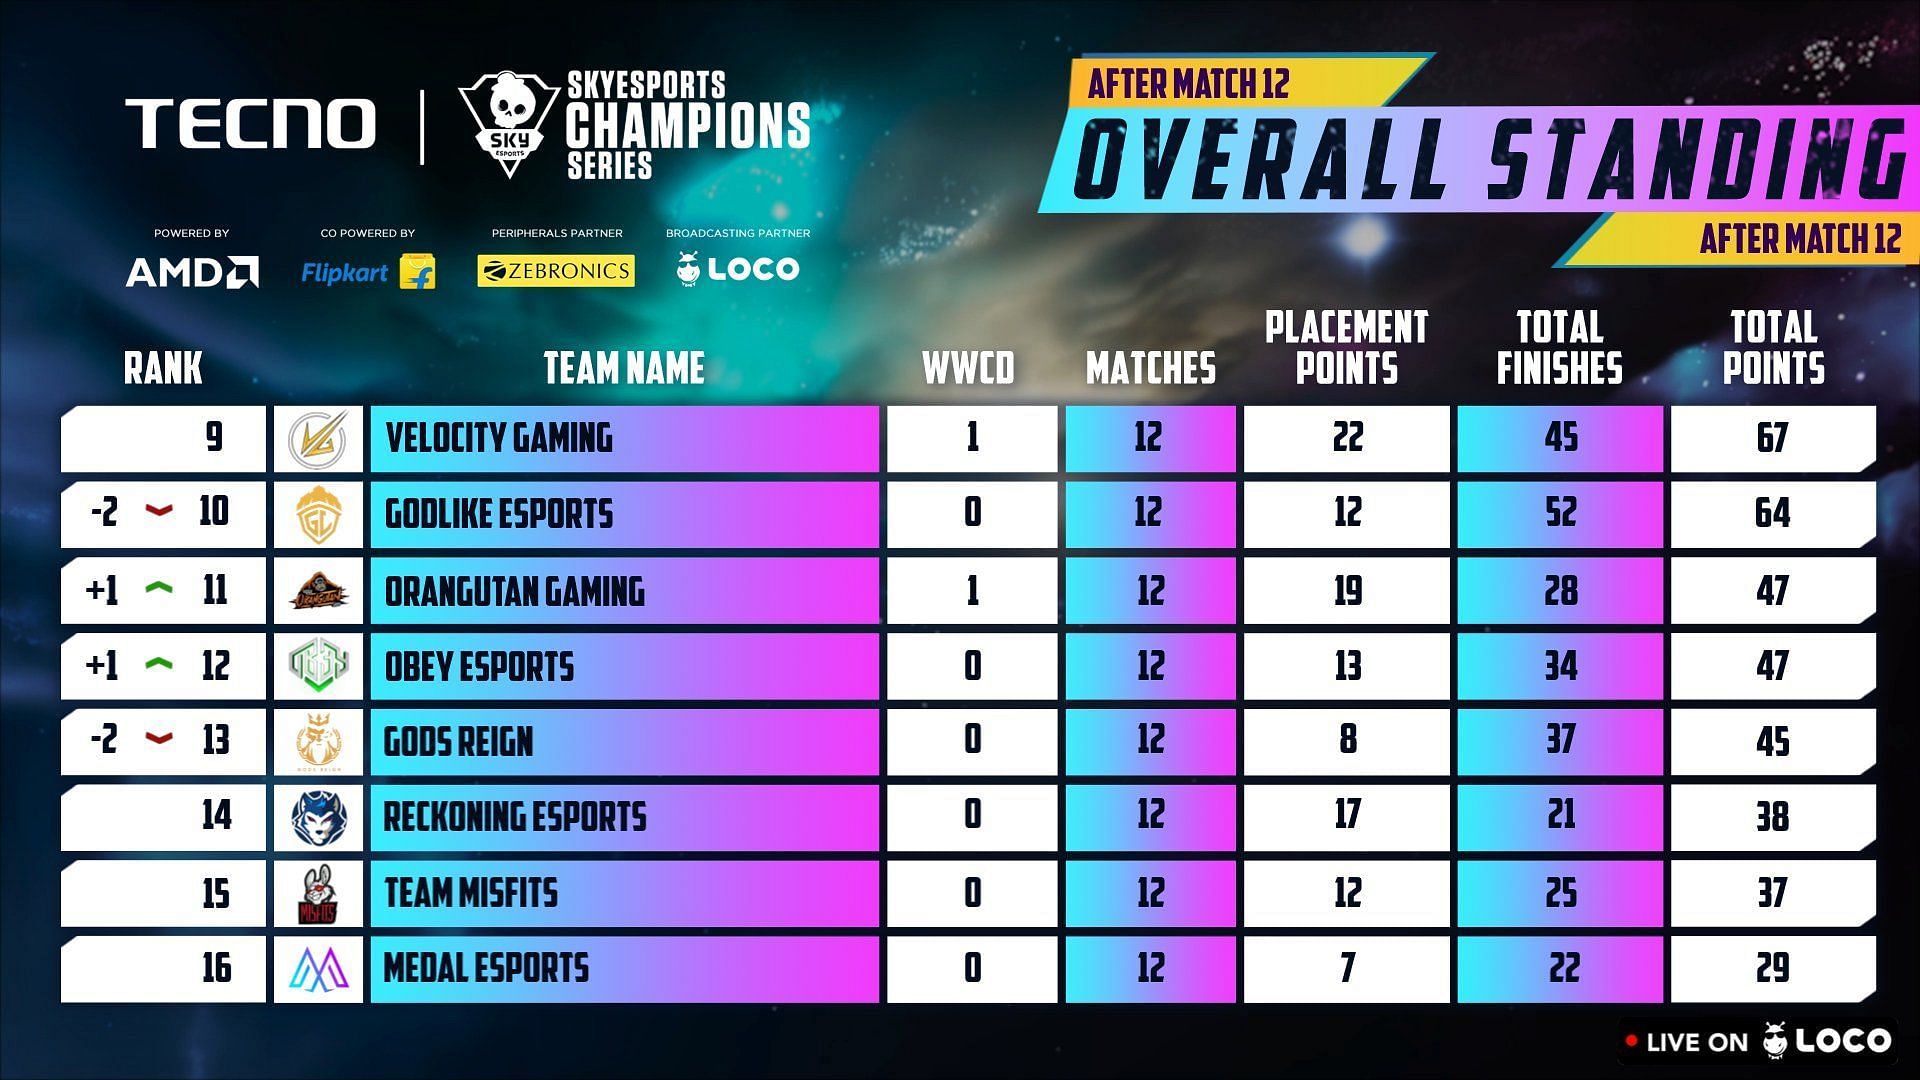 GodLike moved up to the 10th spot in Champions Series BGMI Finals after Day 2 (Image via Skyesports)